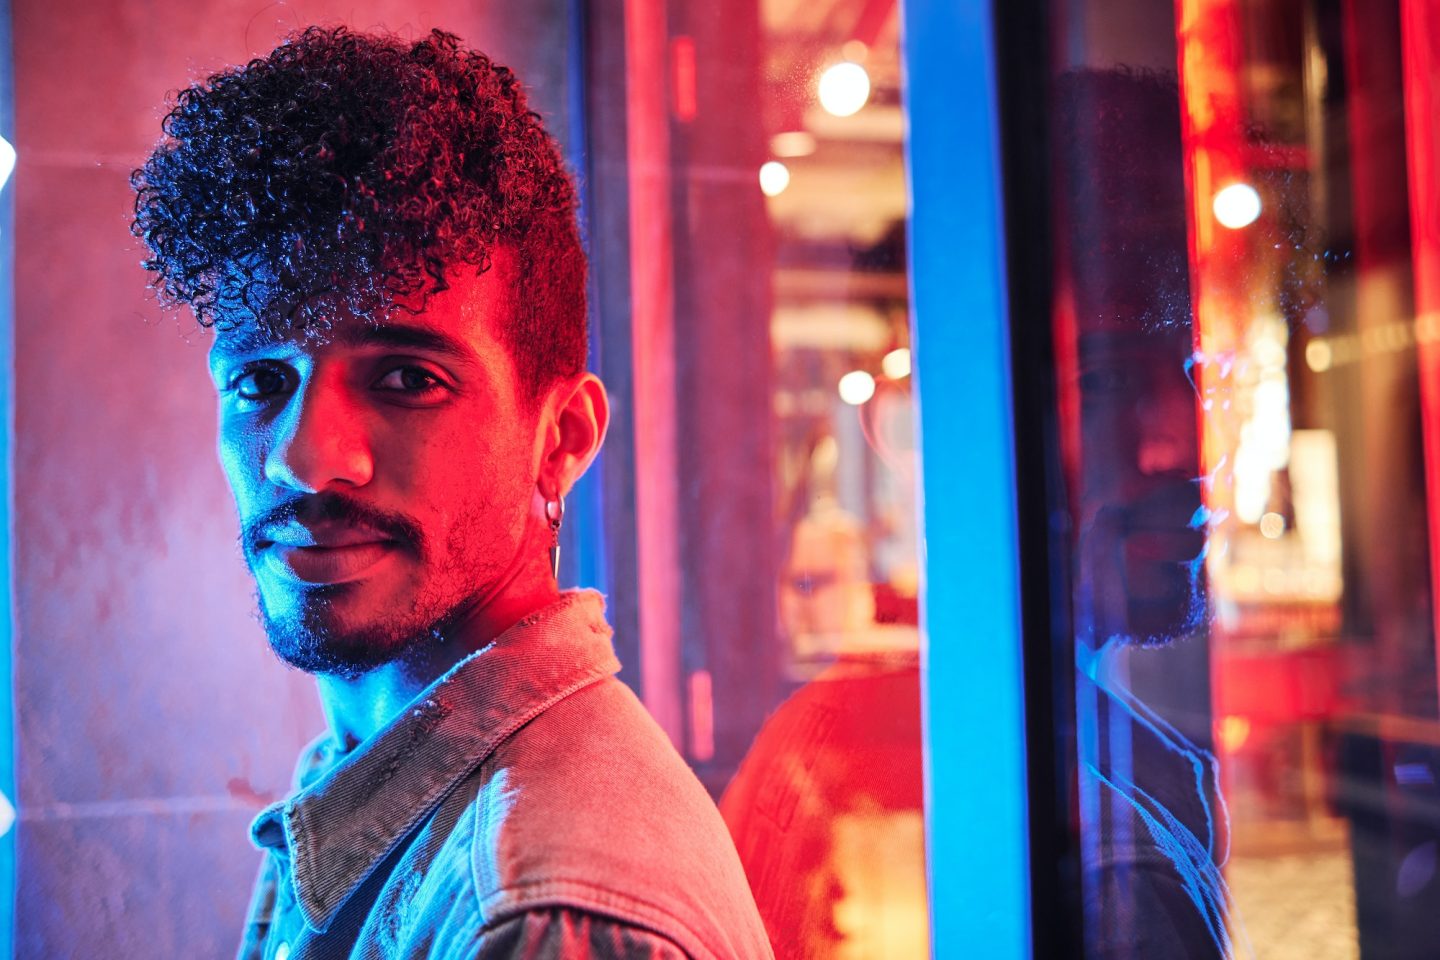 young-hispanic-man-close-to-a-neon-light-with-blue-and-red-lights-e1698314047406.jpg